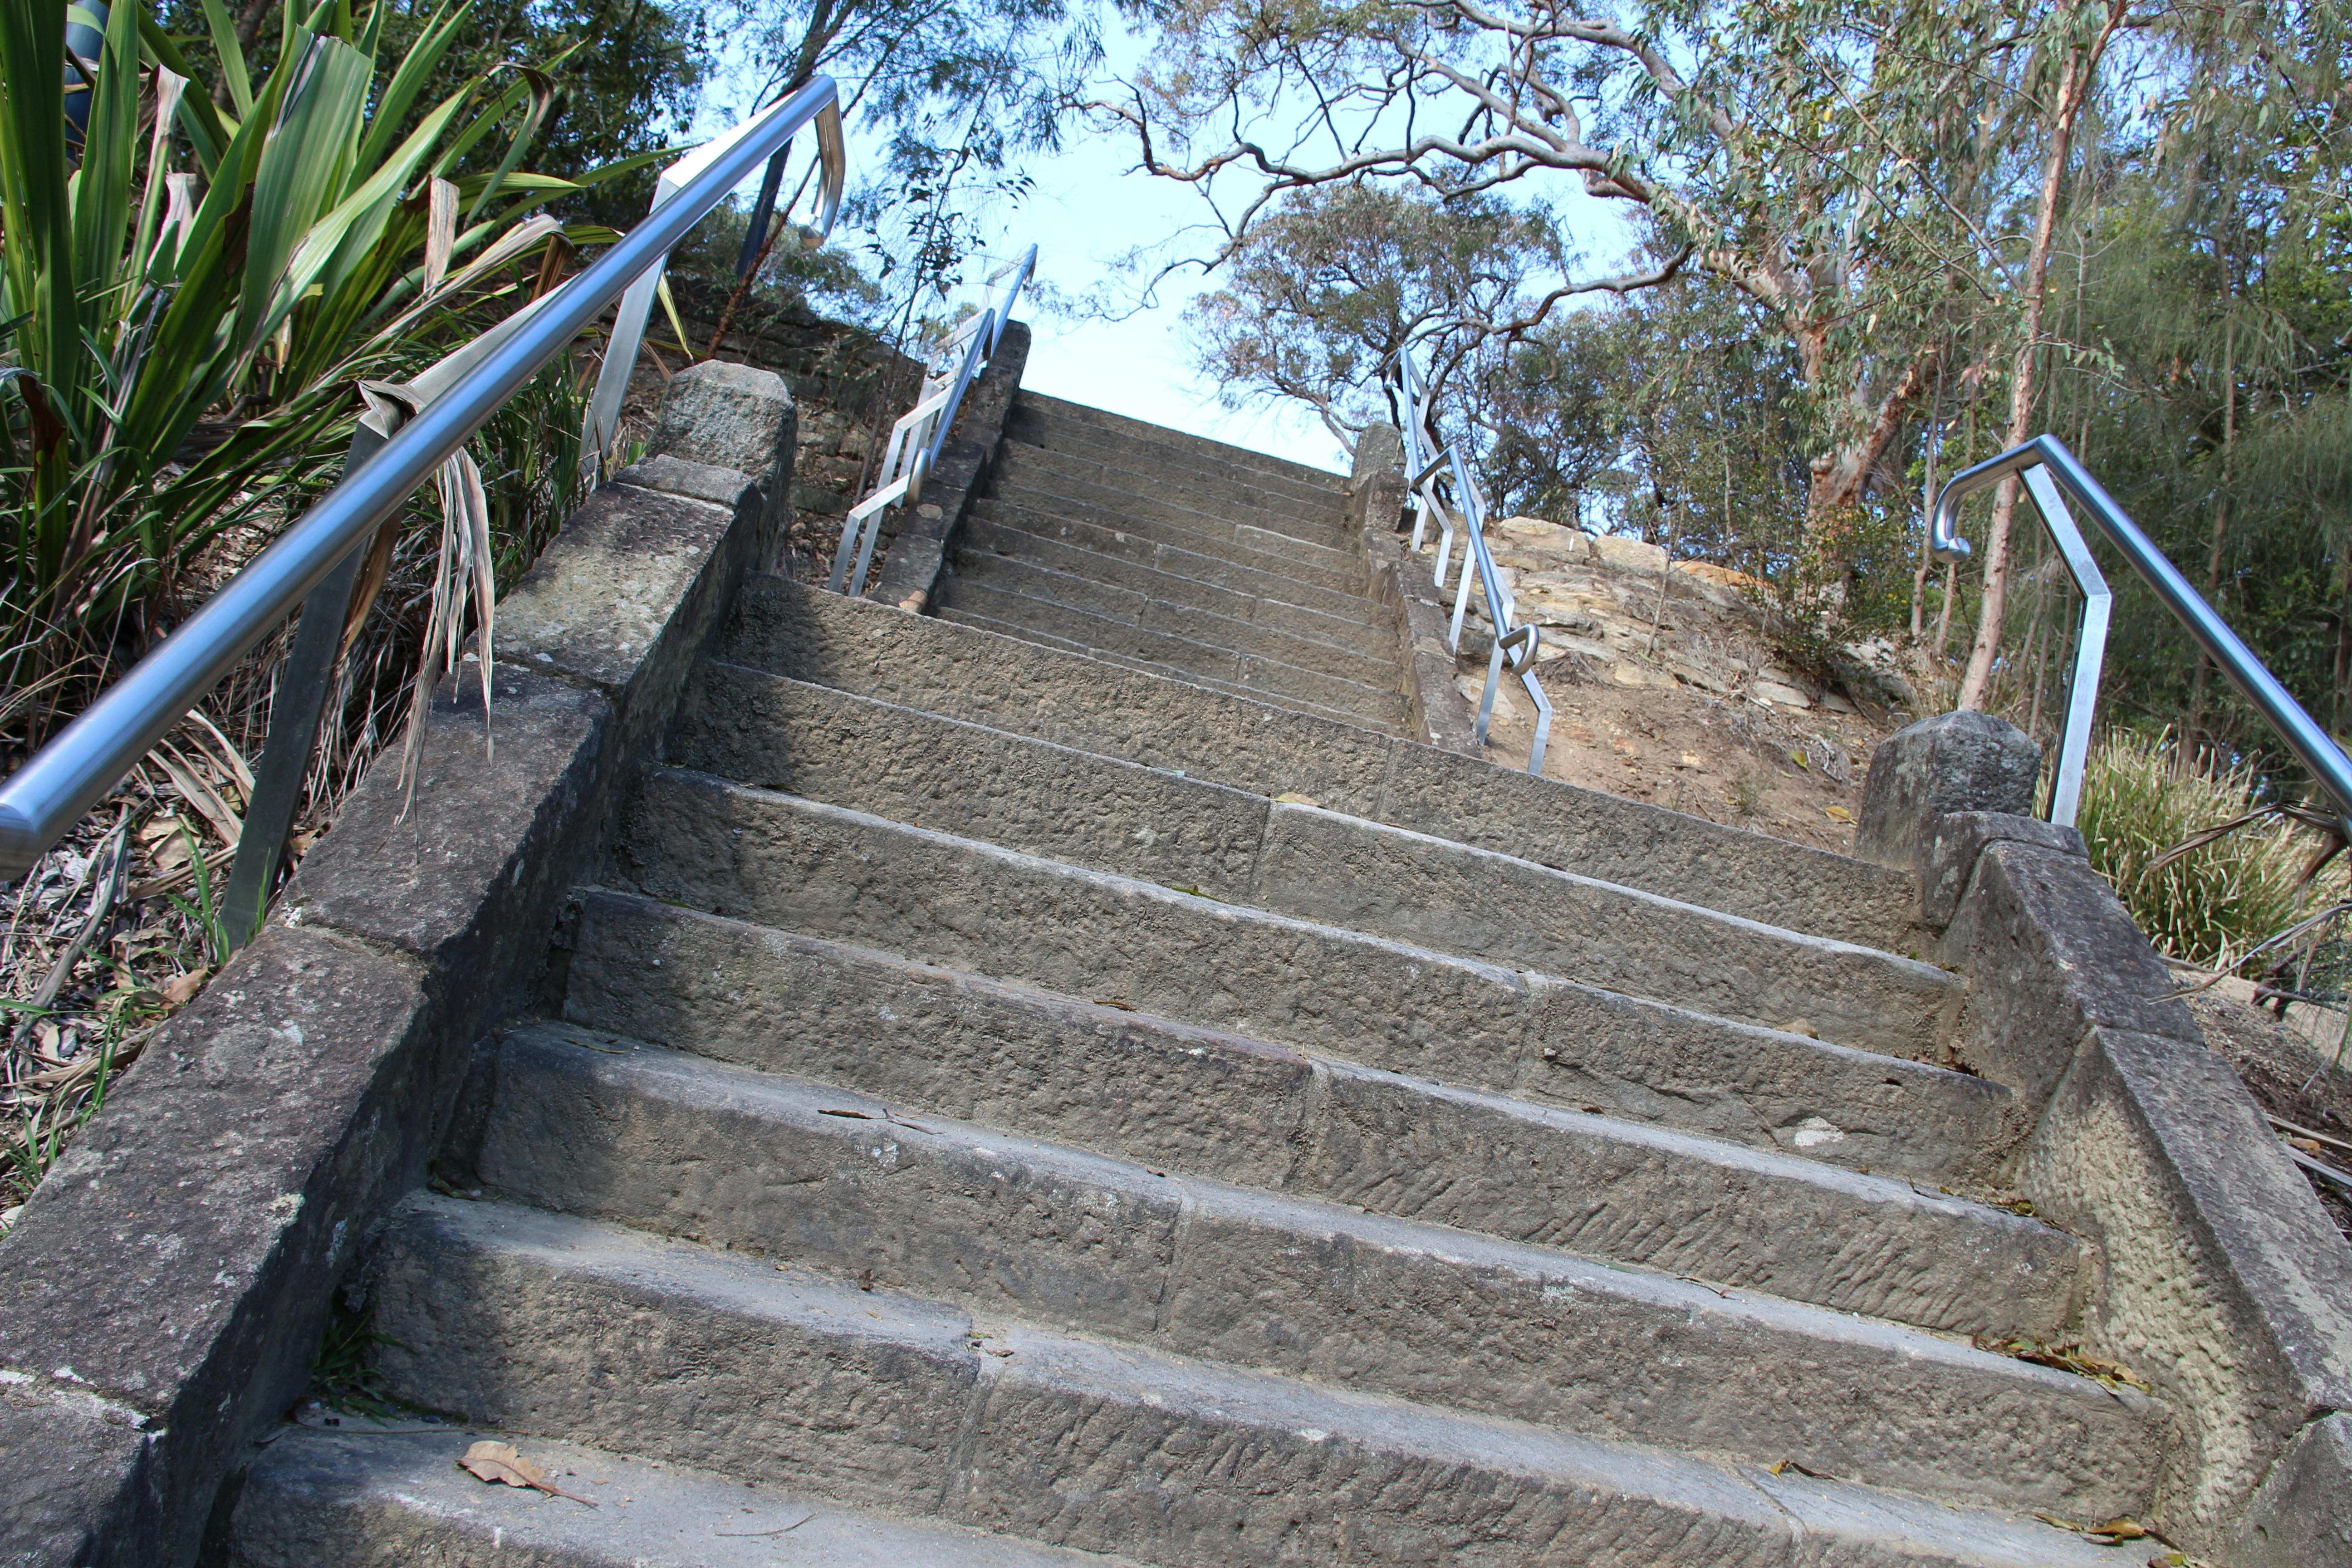 Stairs along the trail